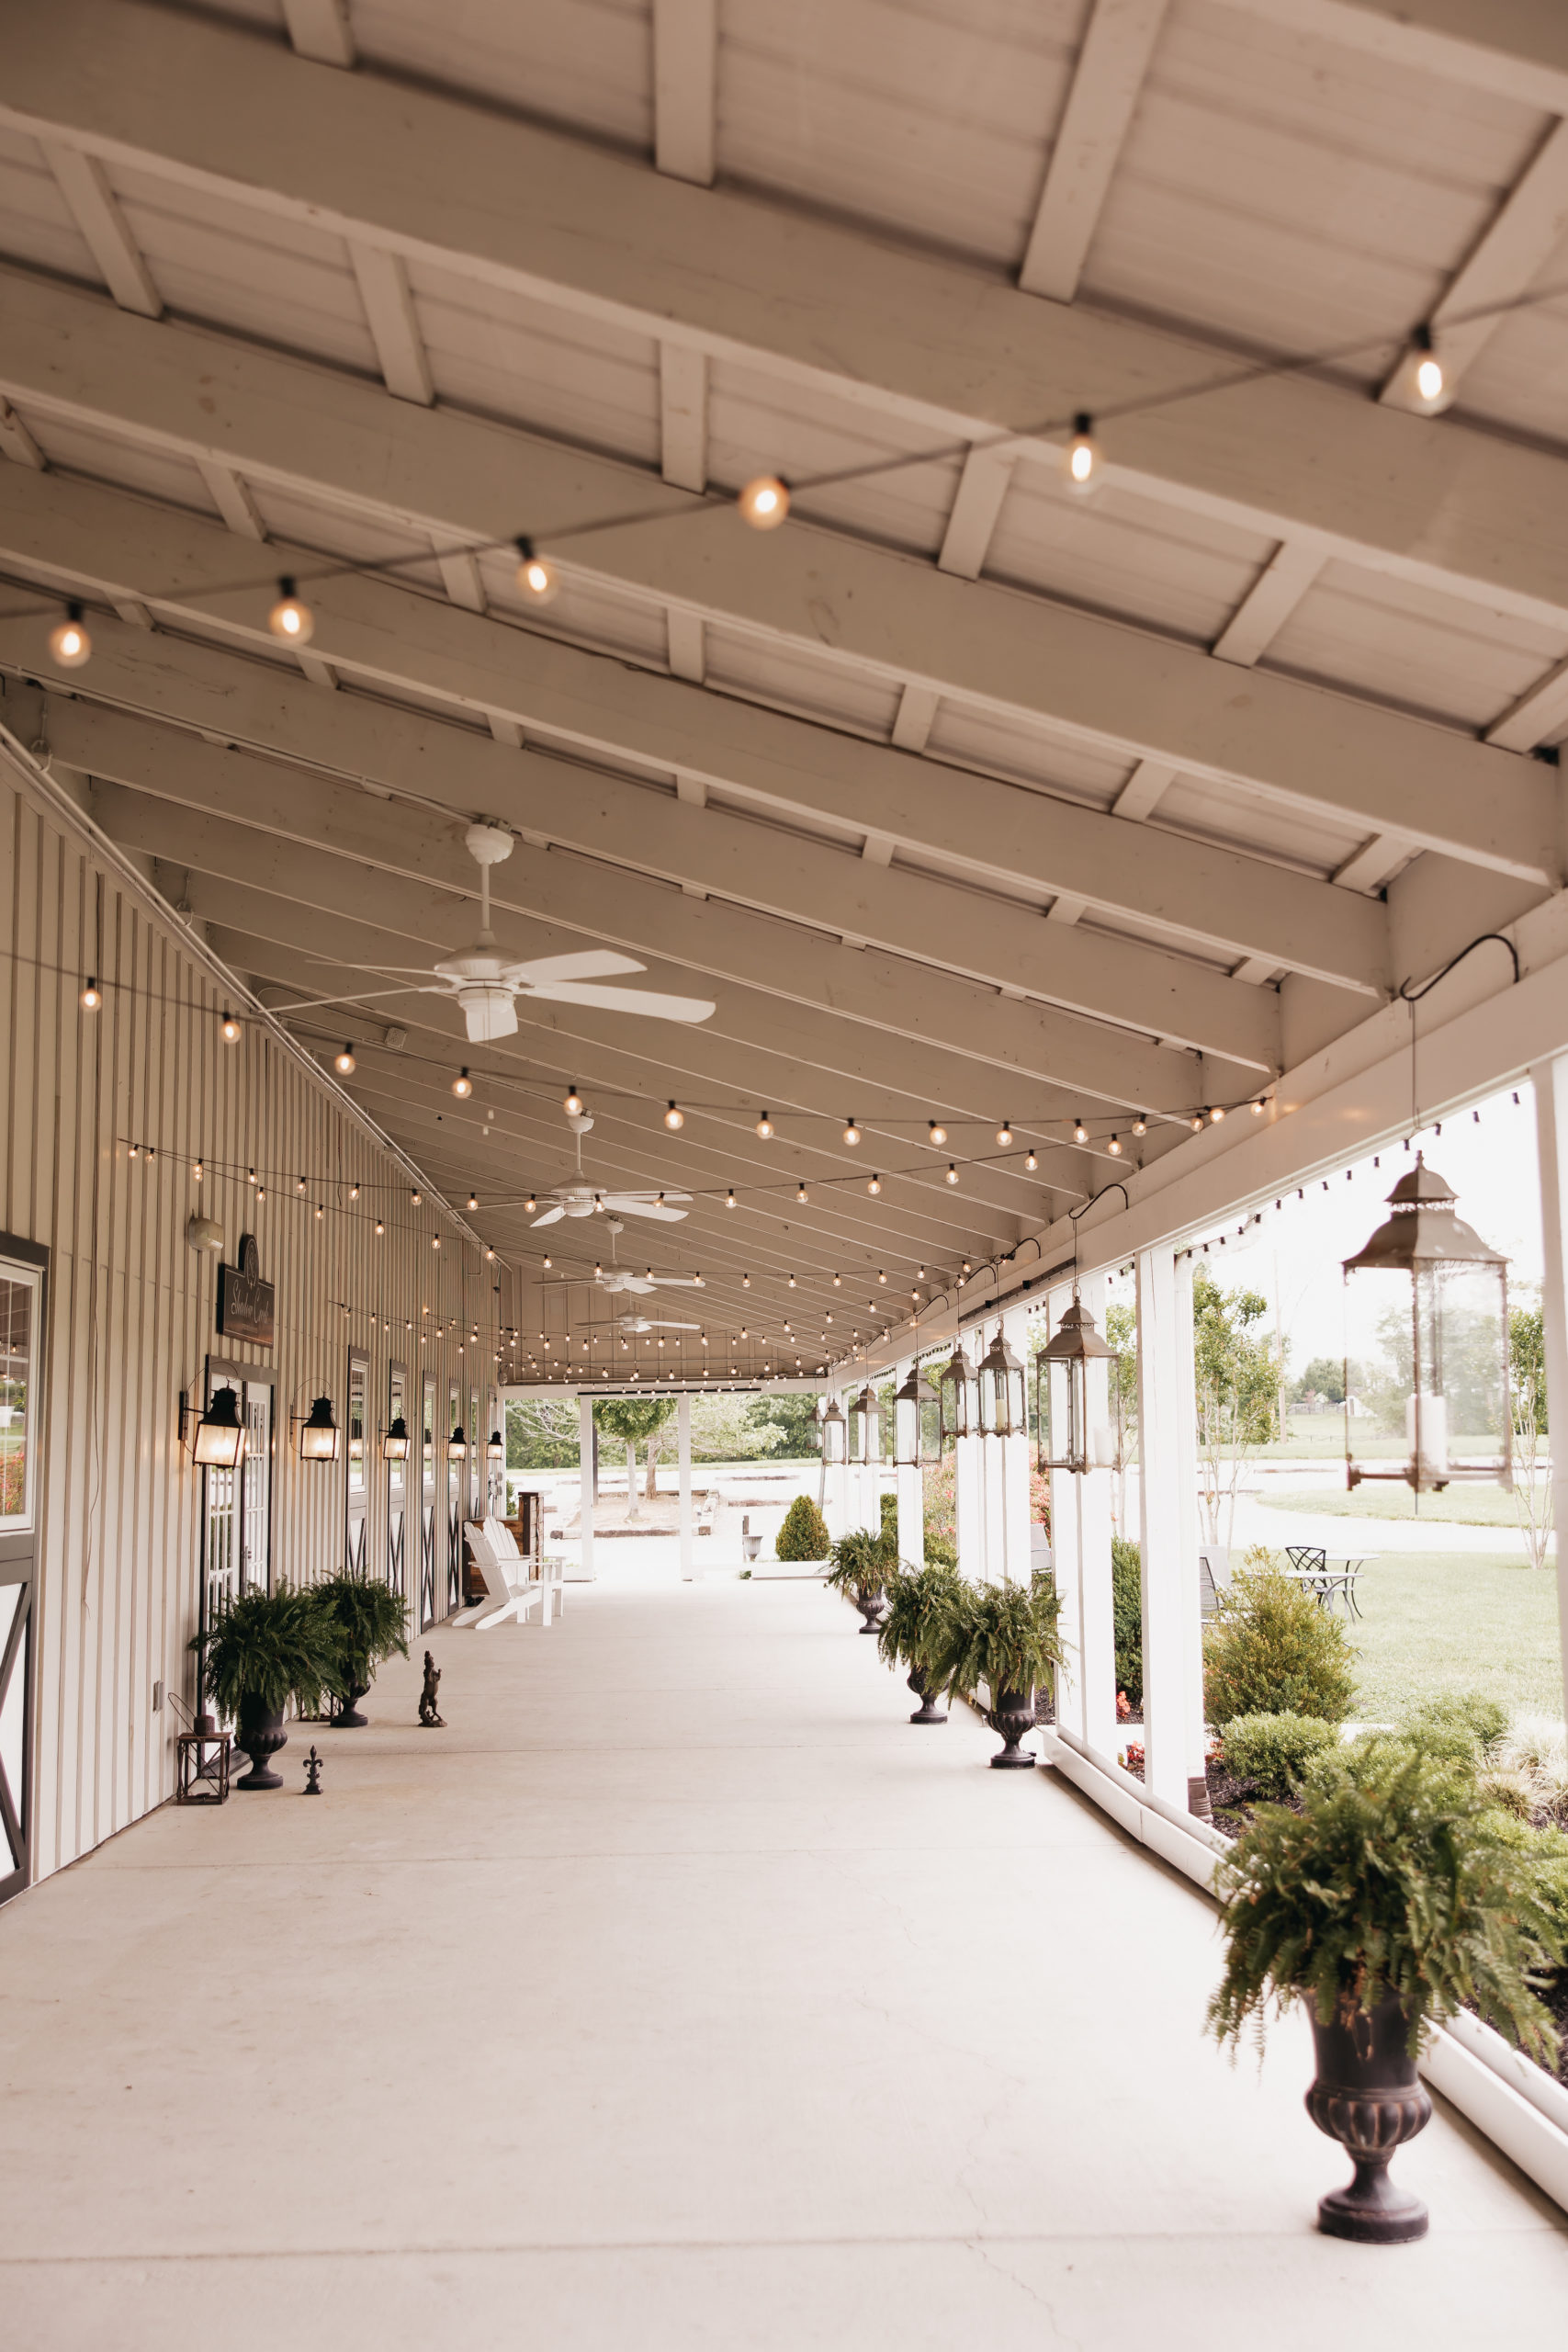 The portico, a charming covered space in front of the barn with string lights, captured by Rachel Yearick Photography